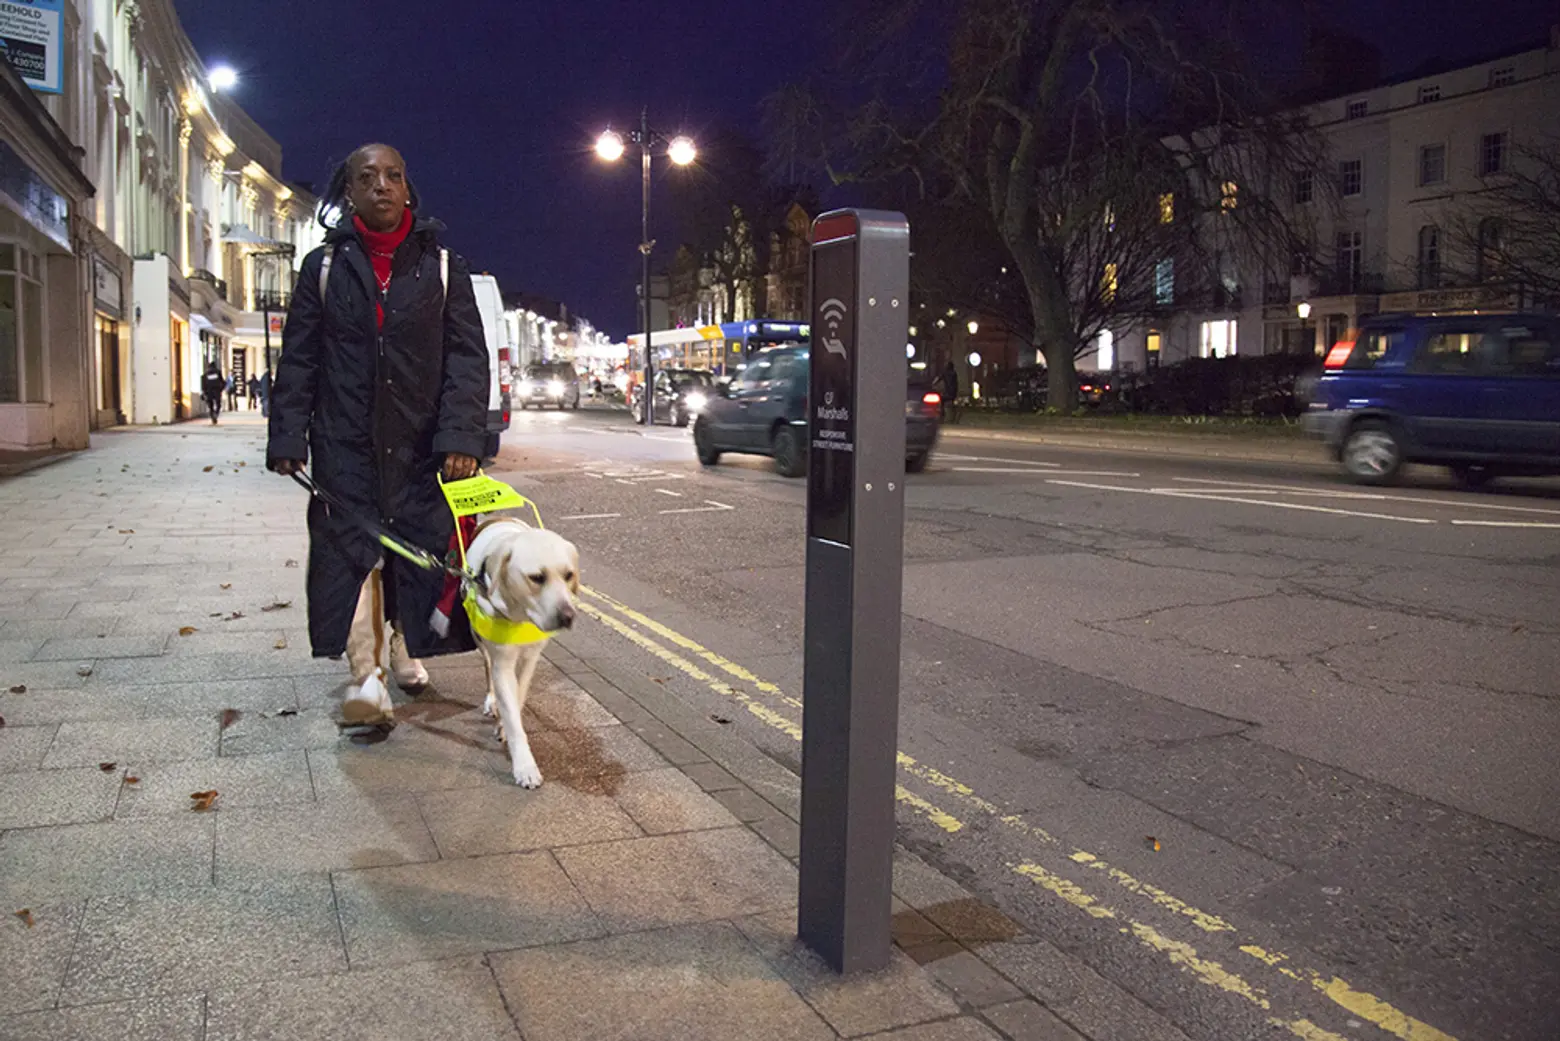 Smart Street Furniture Responds to the Needs of the Blind, Elderly and More